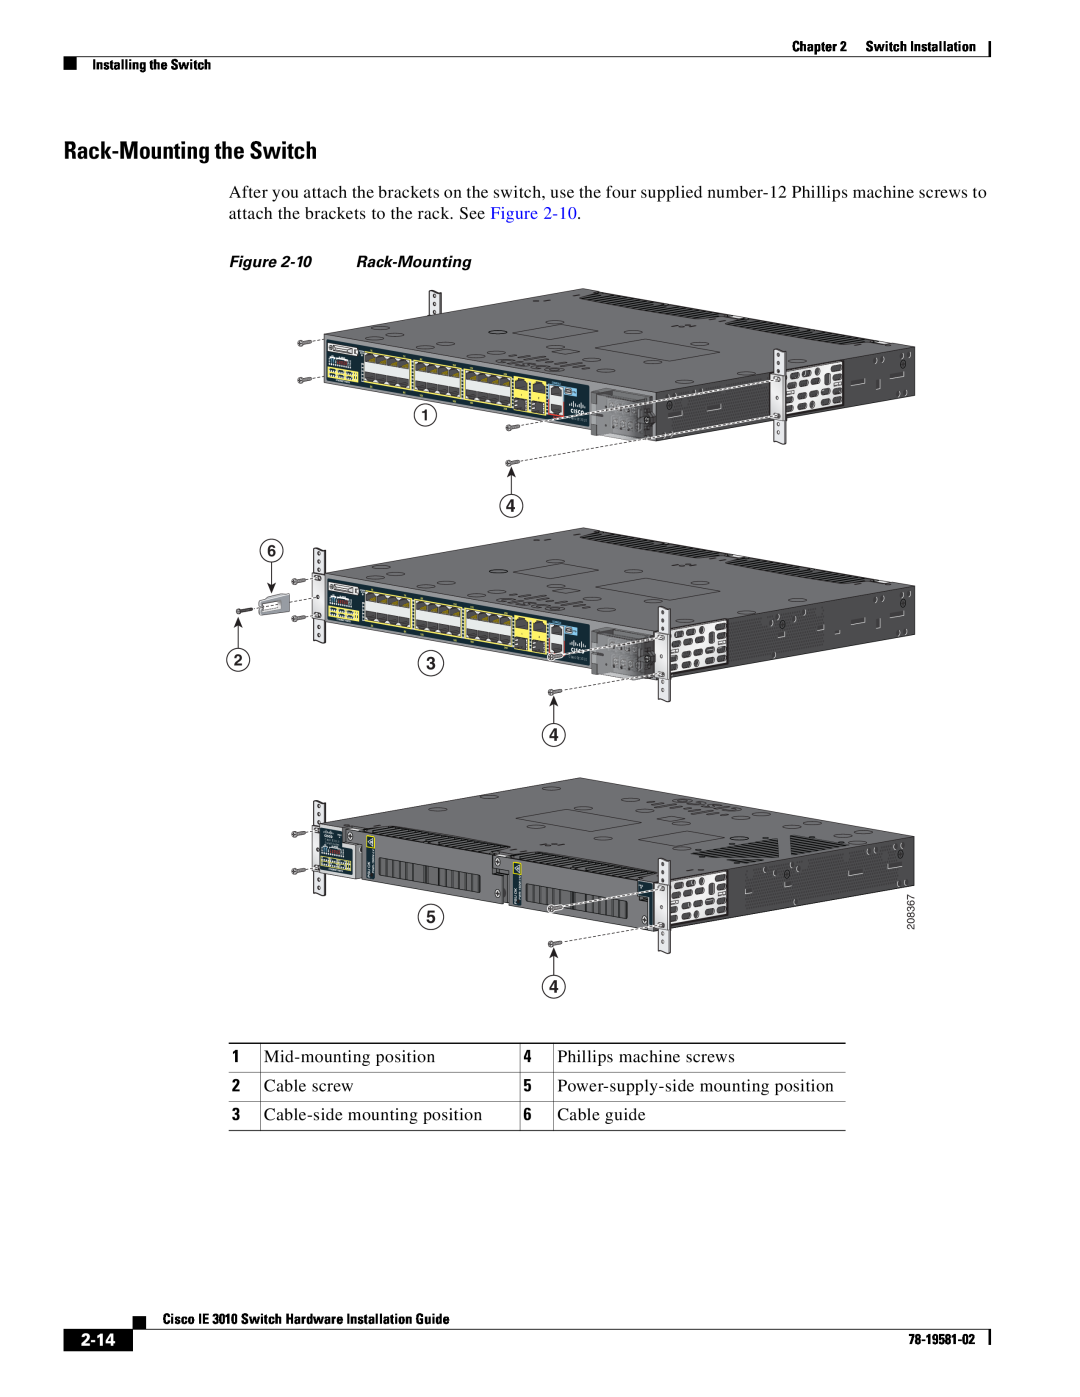 Cisco Systems IE301024TC manual Rack-Mounting the Switch, 2-14 